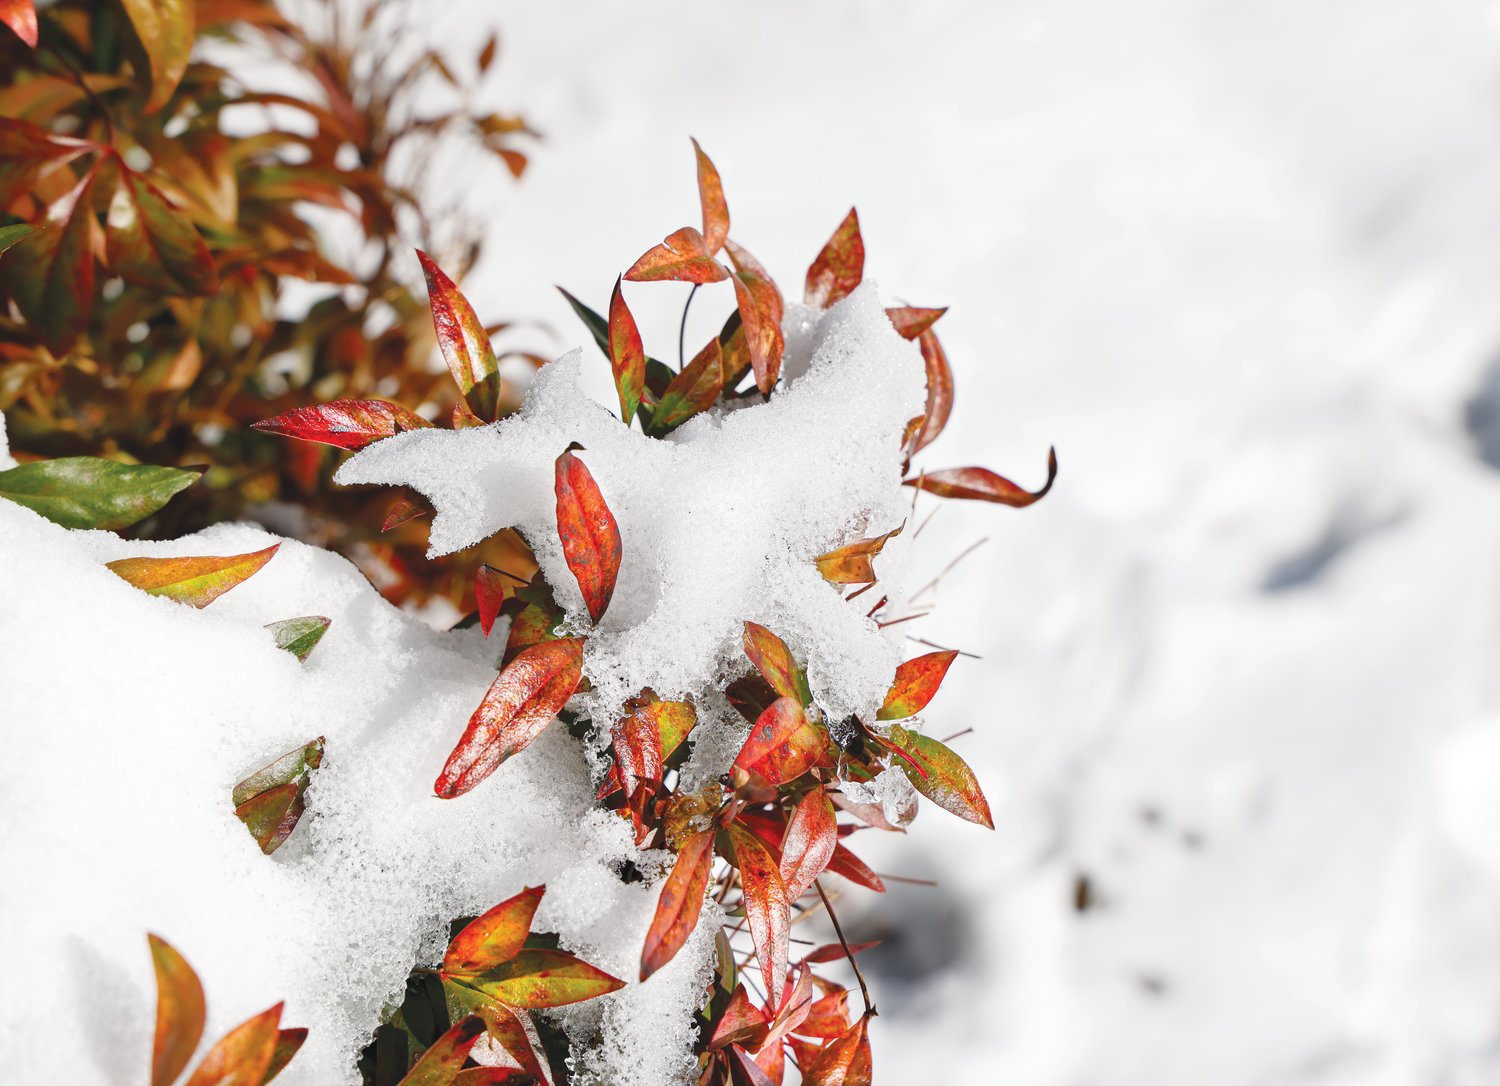 Leaves peek through a clump of snow from Chatham County's second winter storm last weekend.